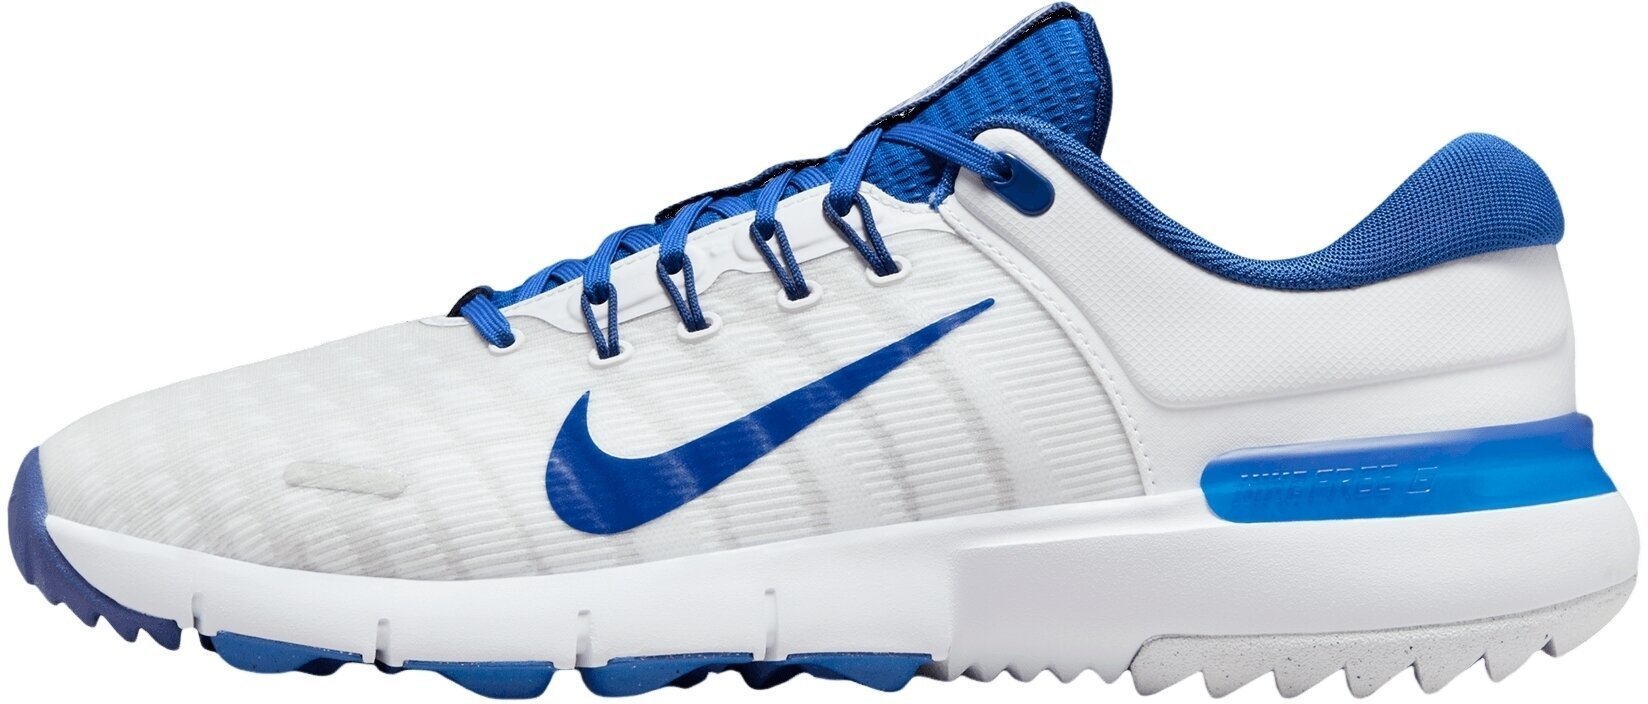 Chaussures de golf pour hommes Nike Free Golf Unisex Shoes Game Royal/Deep Royal Blue/Football Grey 45,5